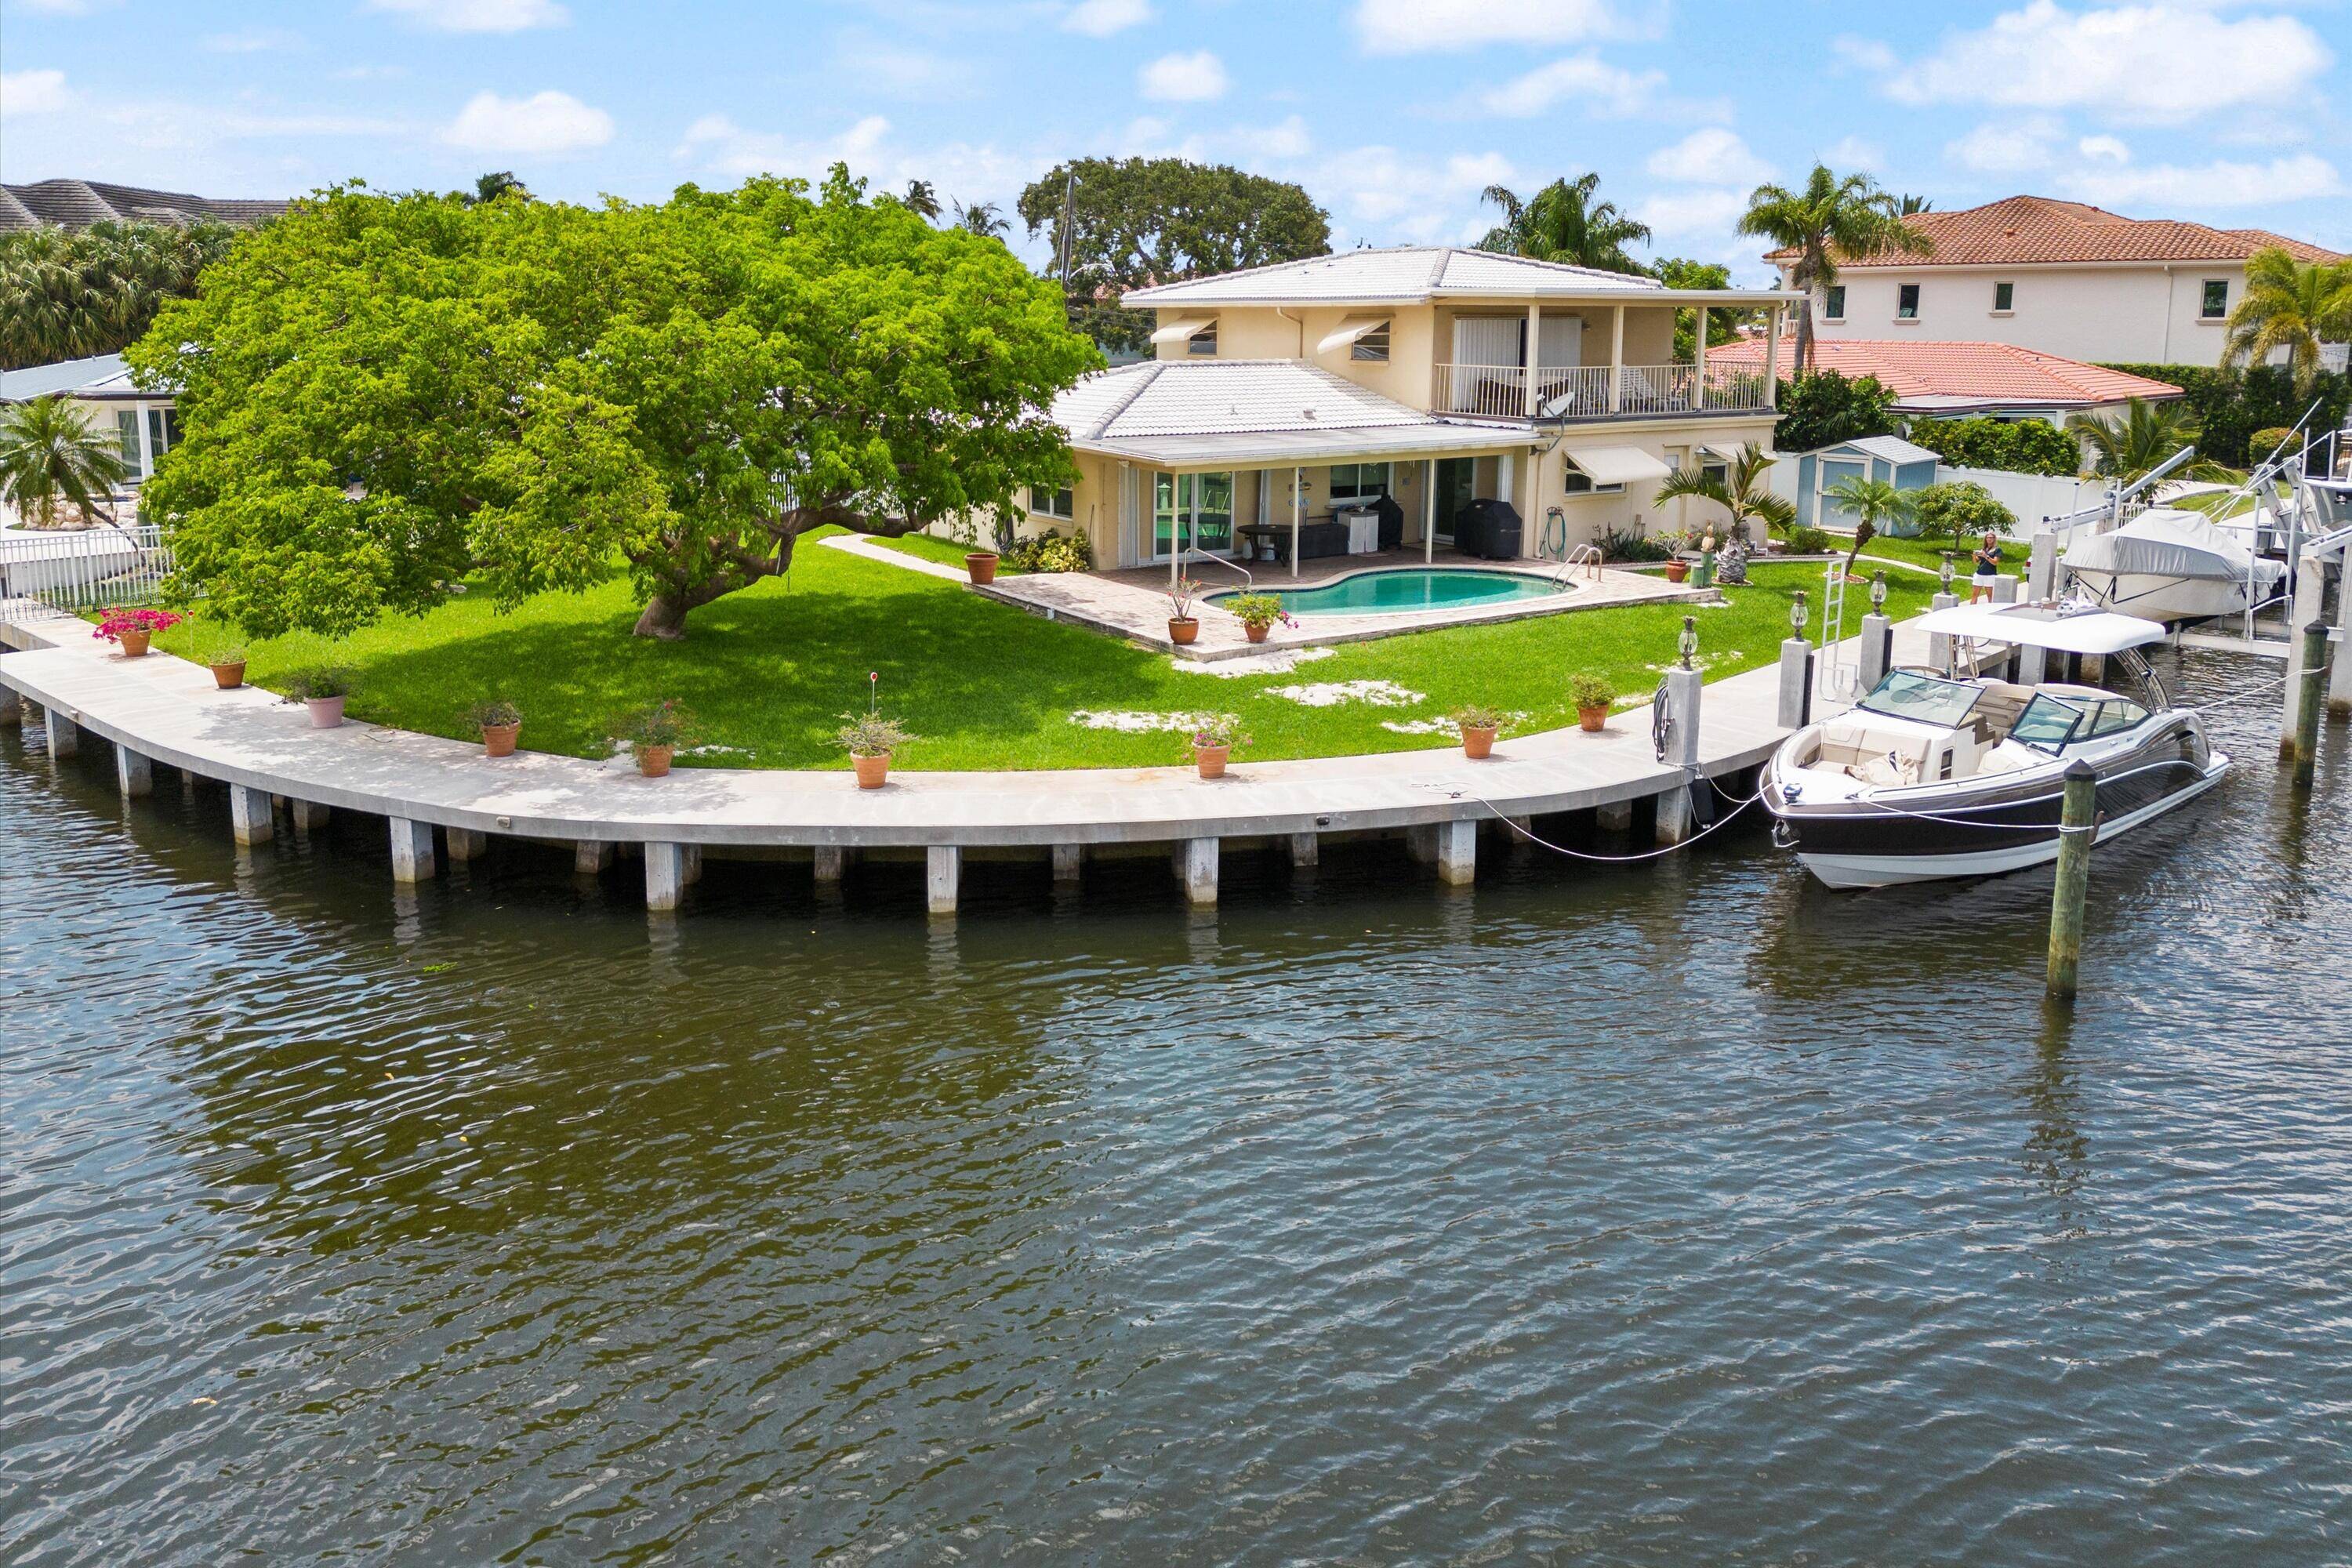 This rare waterfront find in eastern Boca Raton offers 180' ft of improved, widened seawall on a large corner lot, just one block off of the Intracoastal Waterway, offering a ...